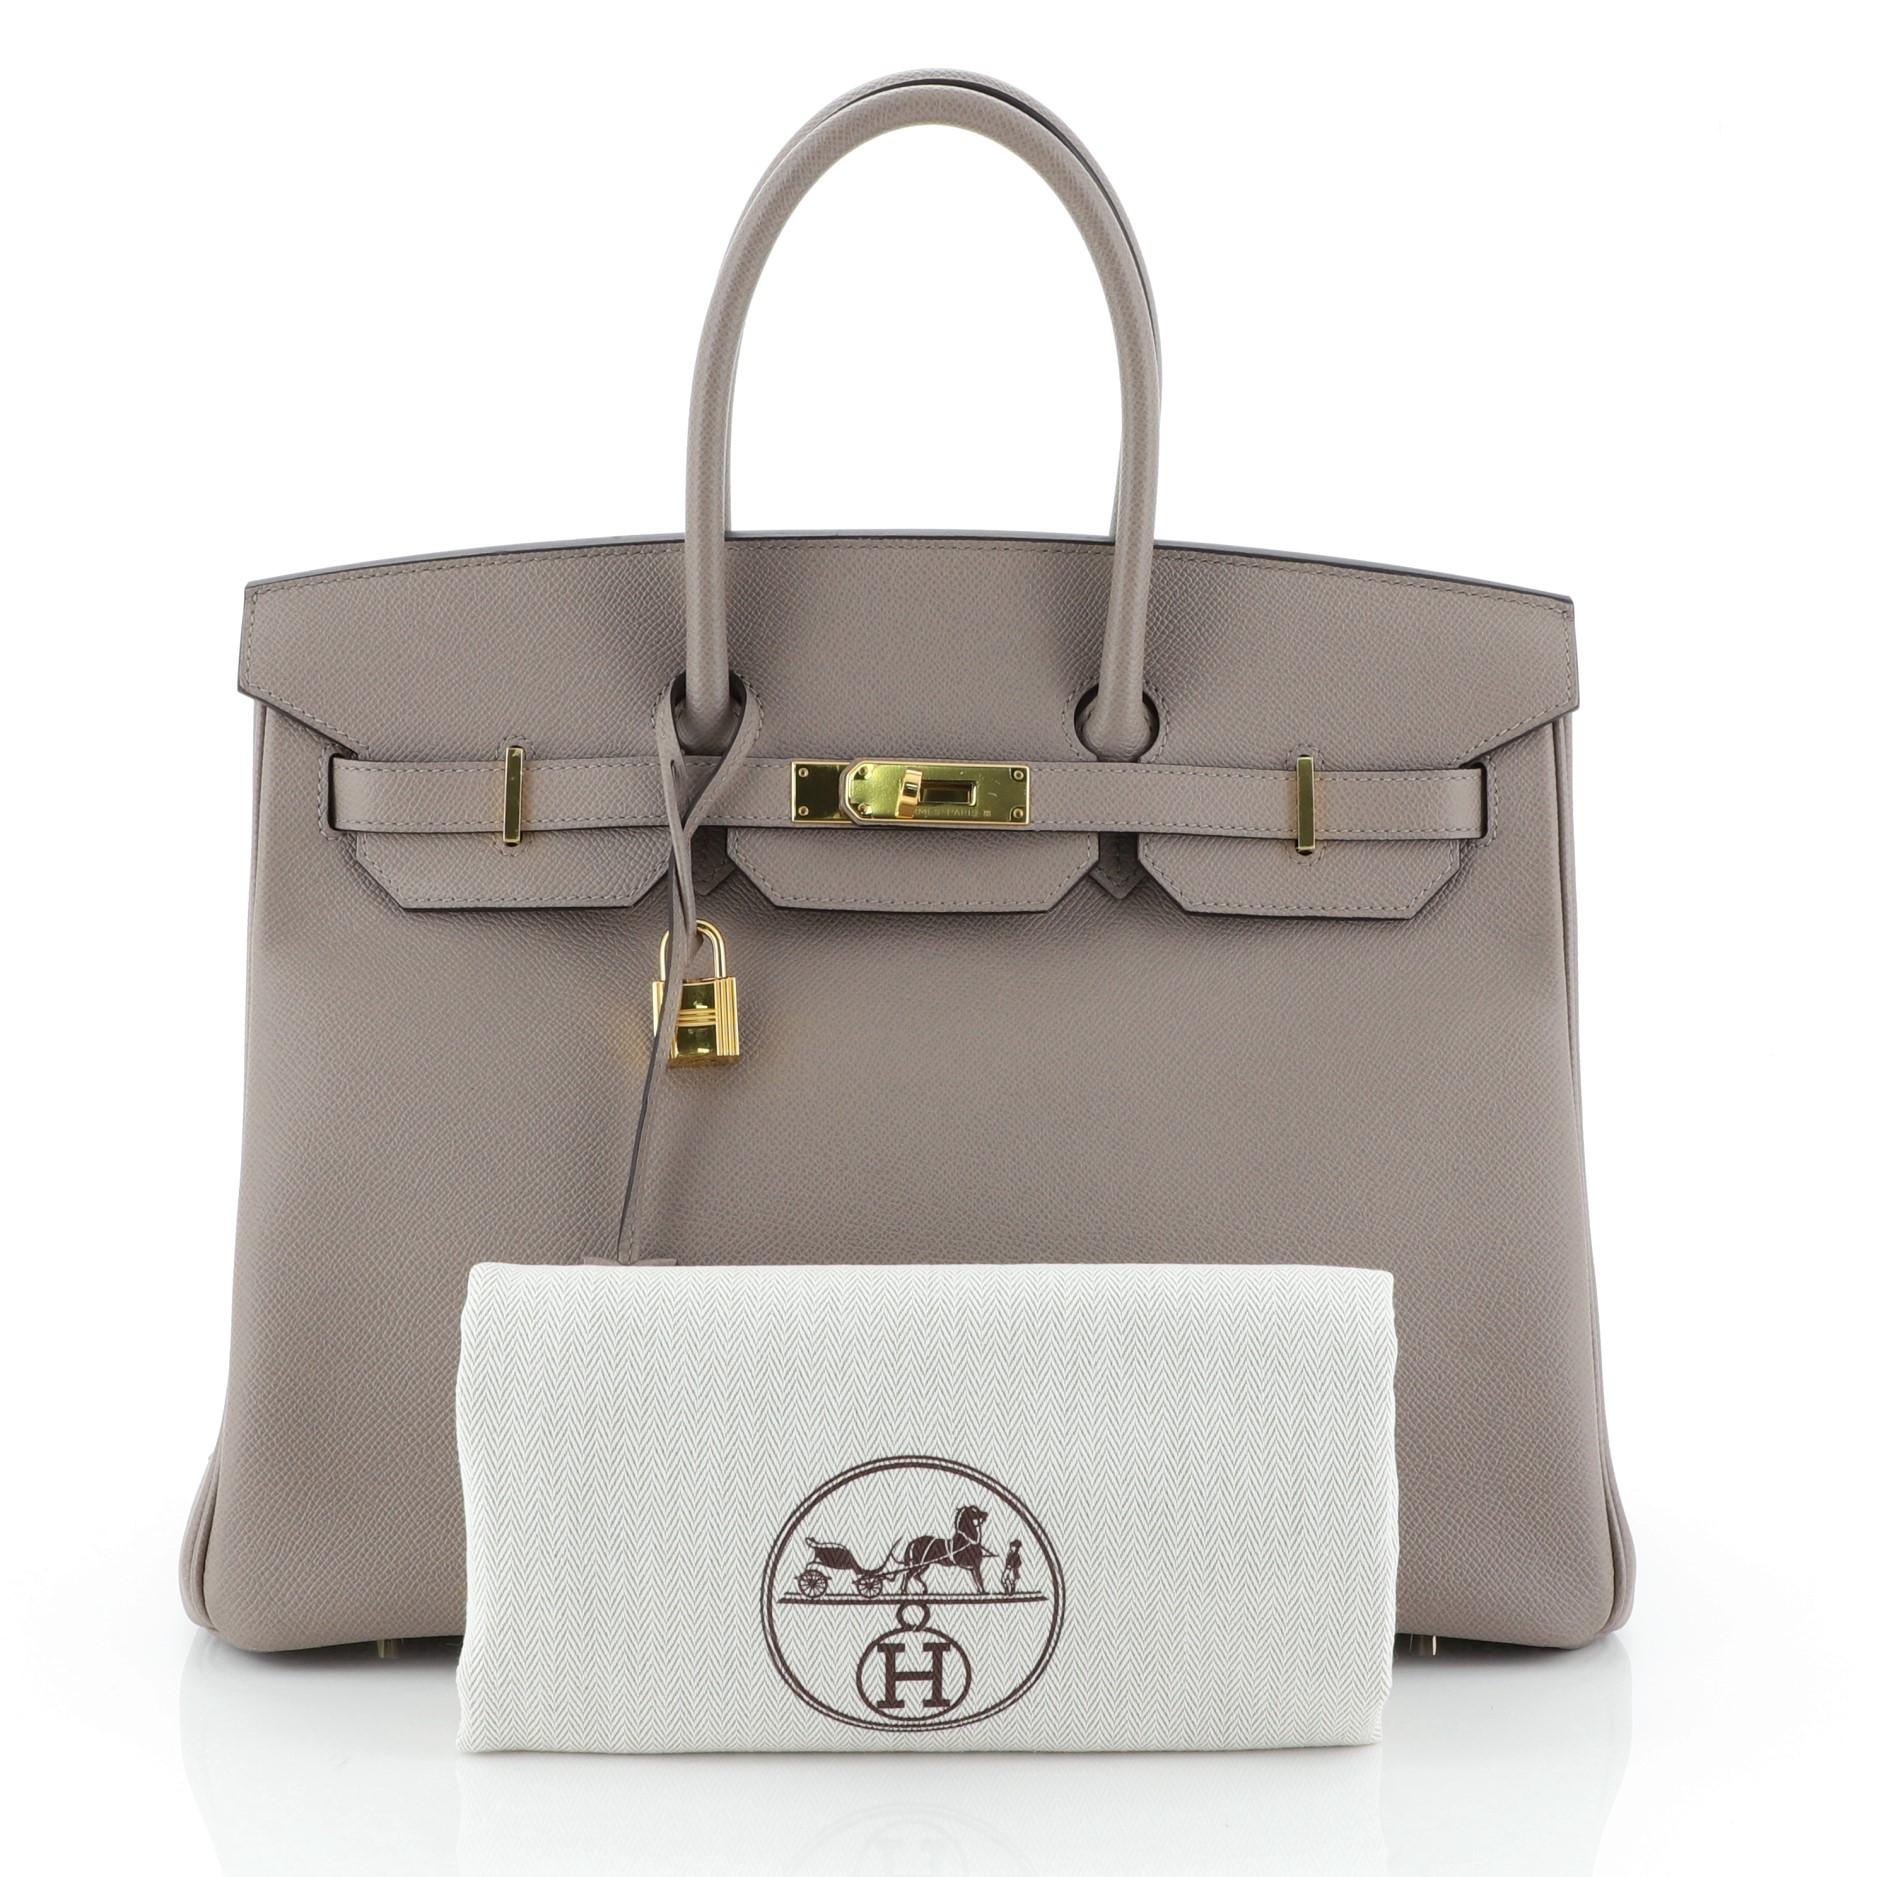 This Hermes Birkin Handbag Gris Asphalte Epsom with Gold Hardware 35, crafted in Gris Asphalte gray Epsom leather, features dual rolled handles, frontal flap, and gold hardware. Its turn-lock closure opens to a Gris Asphalte gray Chevre leather